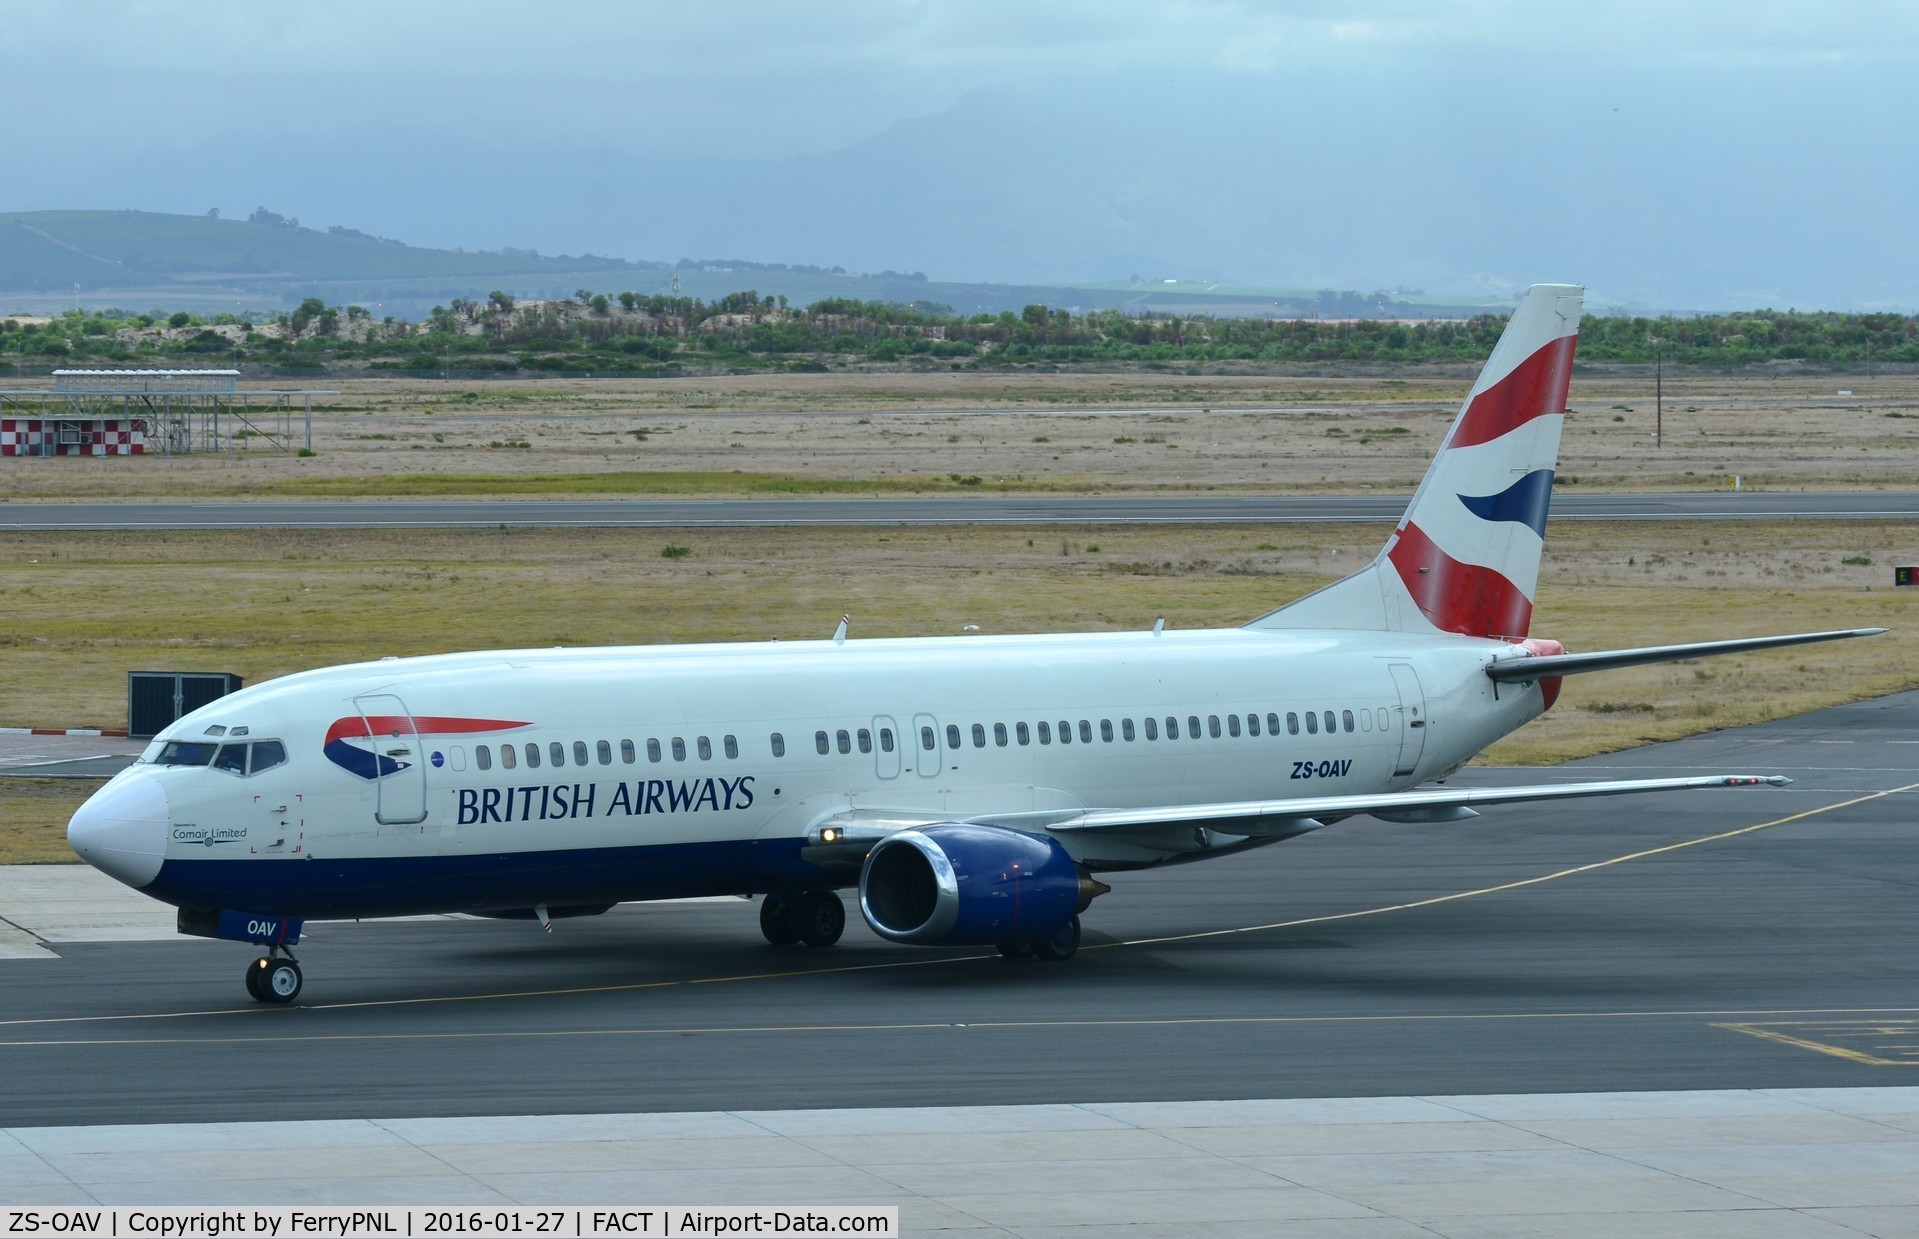 ZS-OAV, 1993 Boeing 737-4H6 C/N 27086, BA B734 operated by Comair